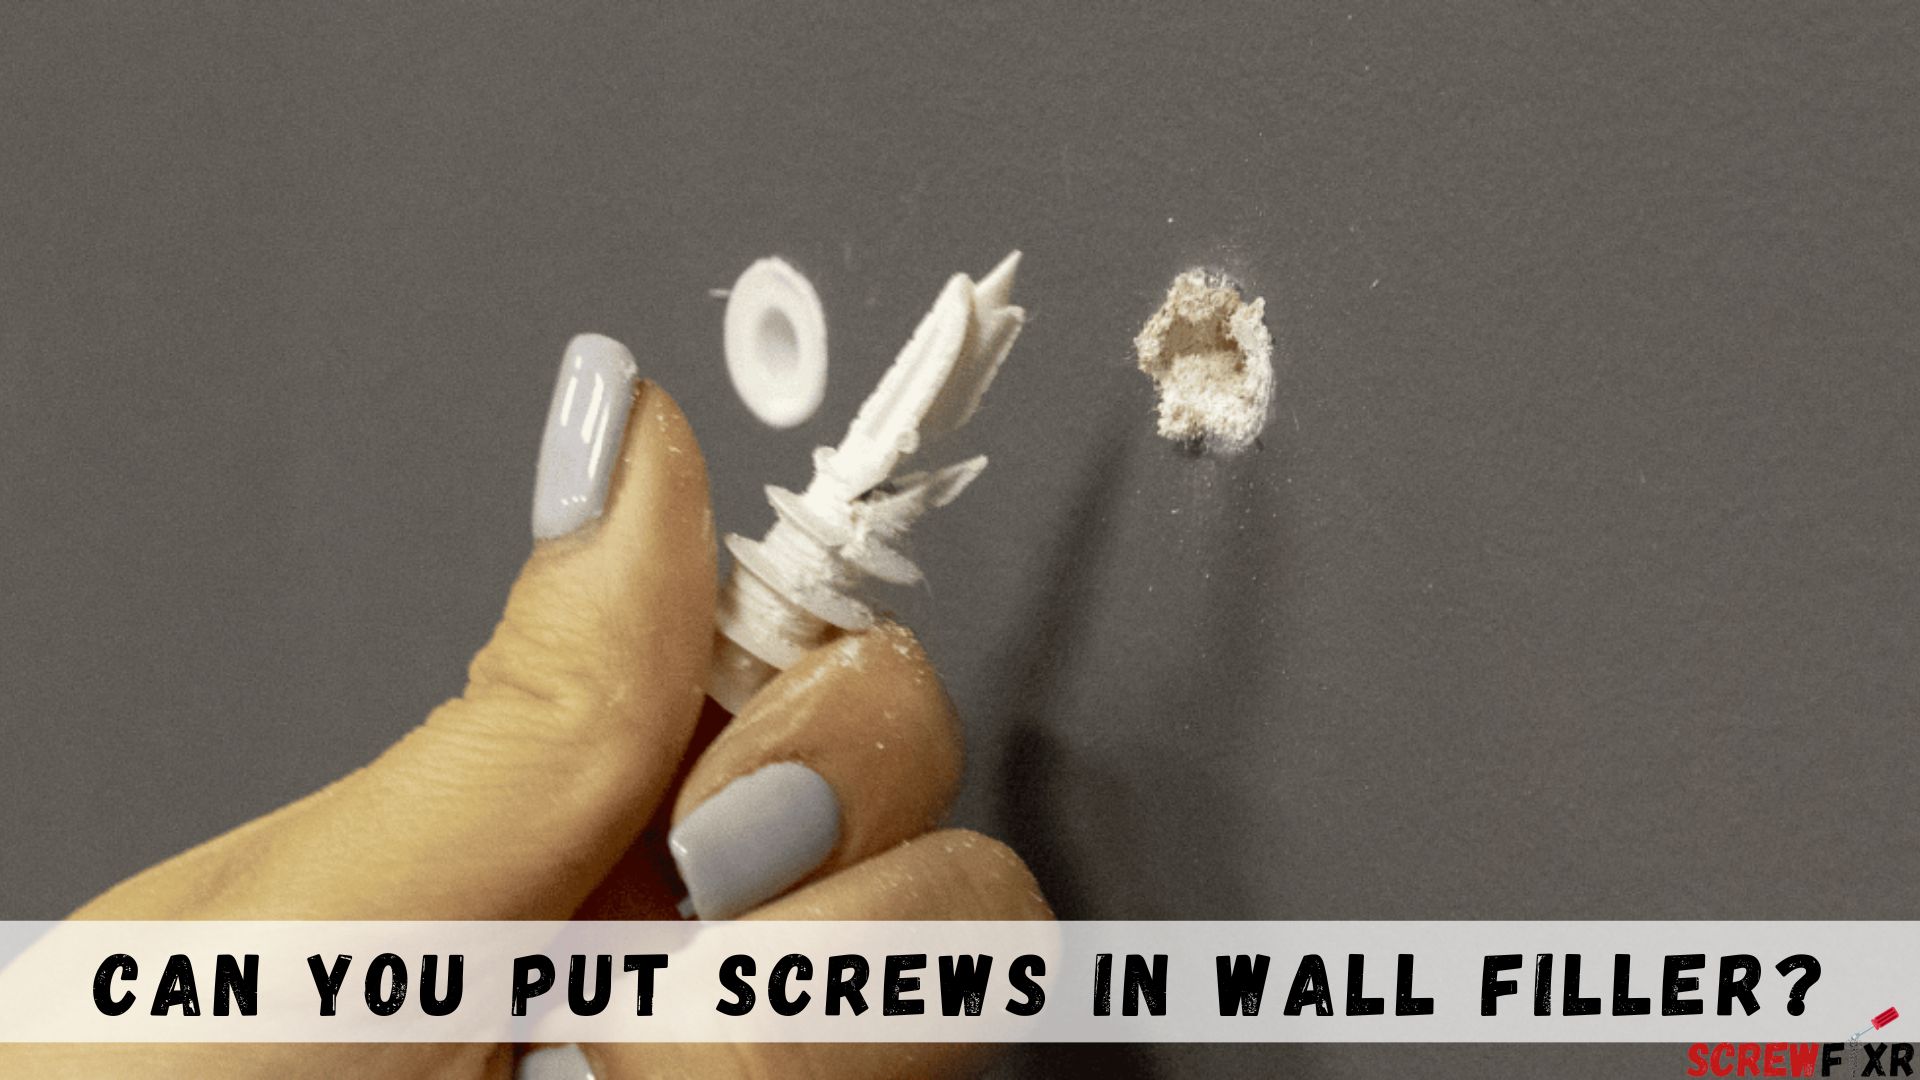 Can You Put Screws in Wall Filler?